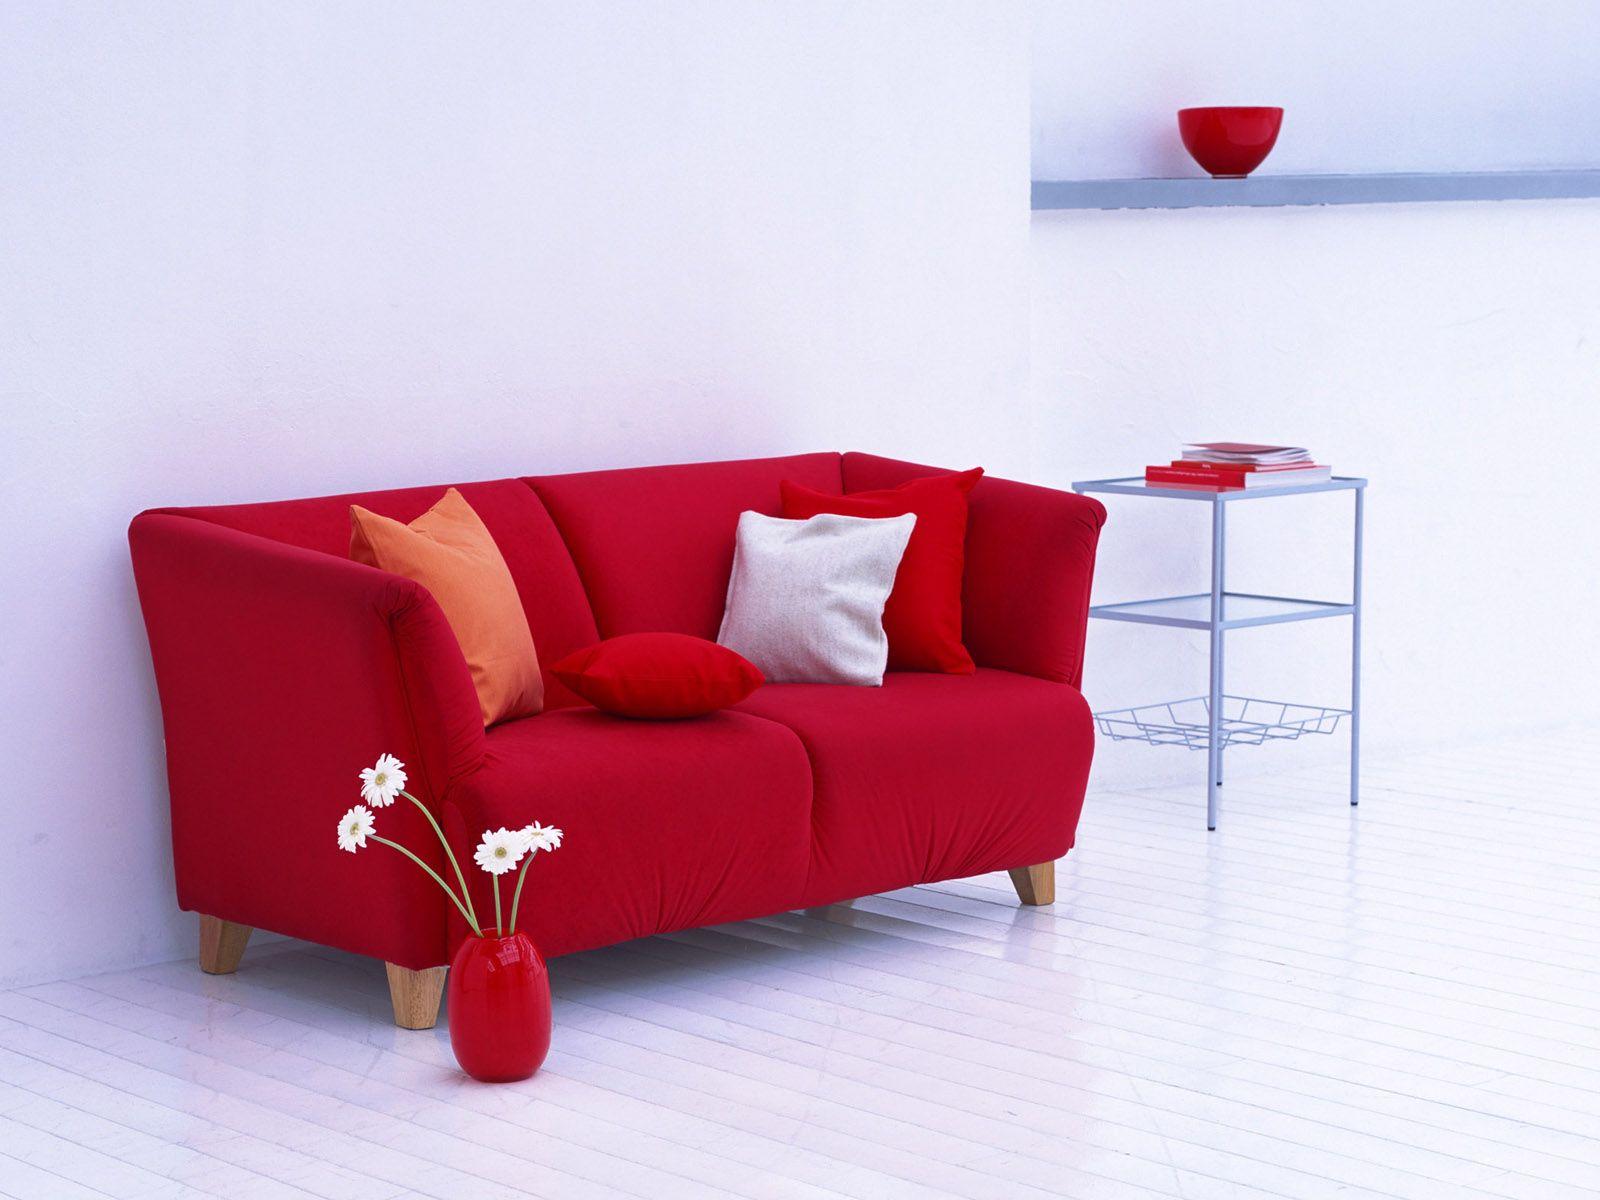 Red couch wallpaper and image, picture, photo